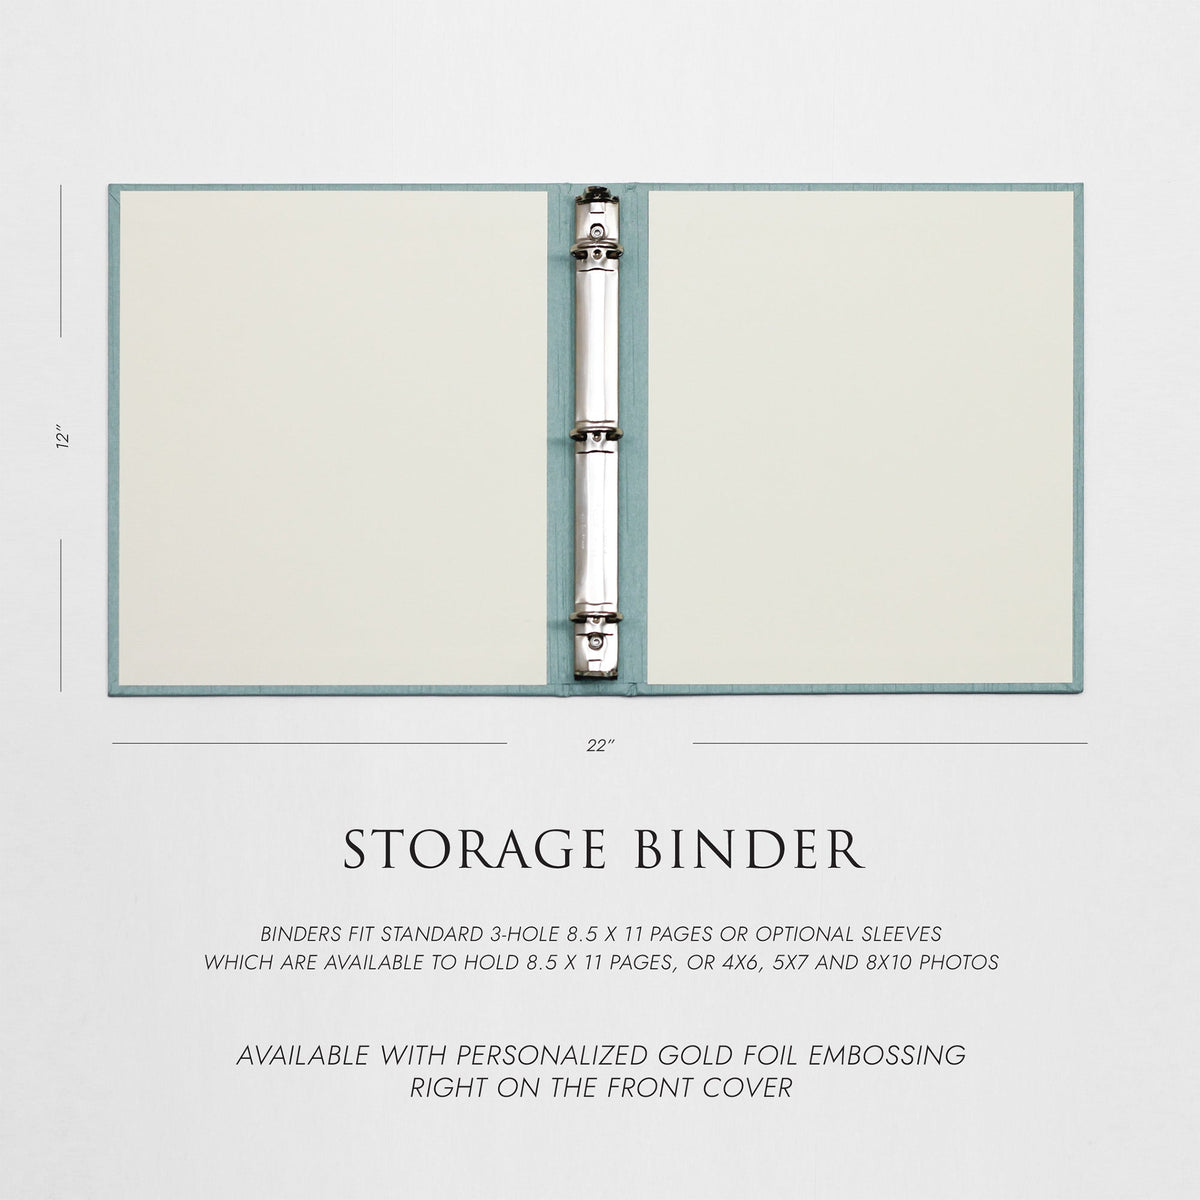 Storage Binder for Photos or Documents with Celery Cotton Cover